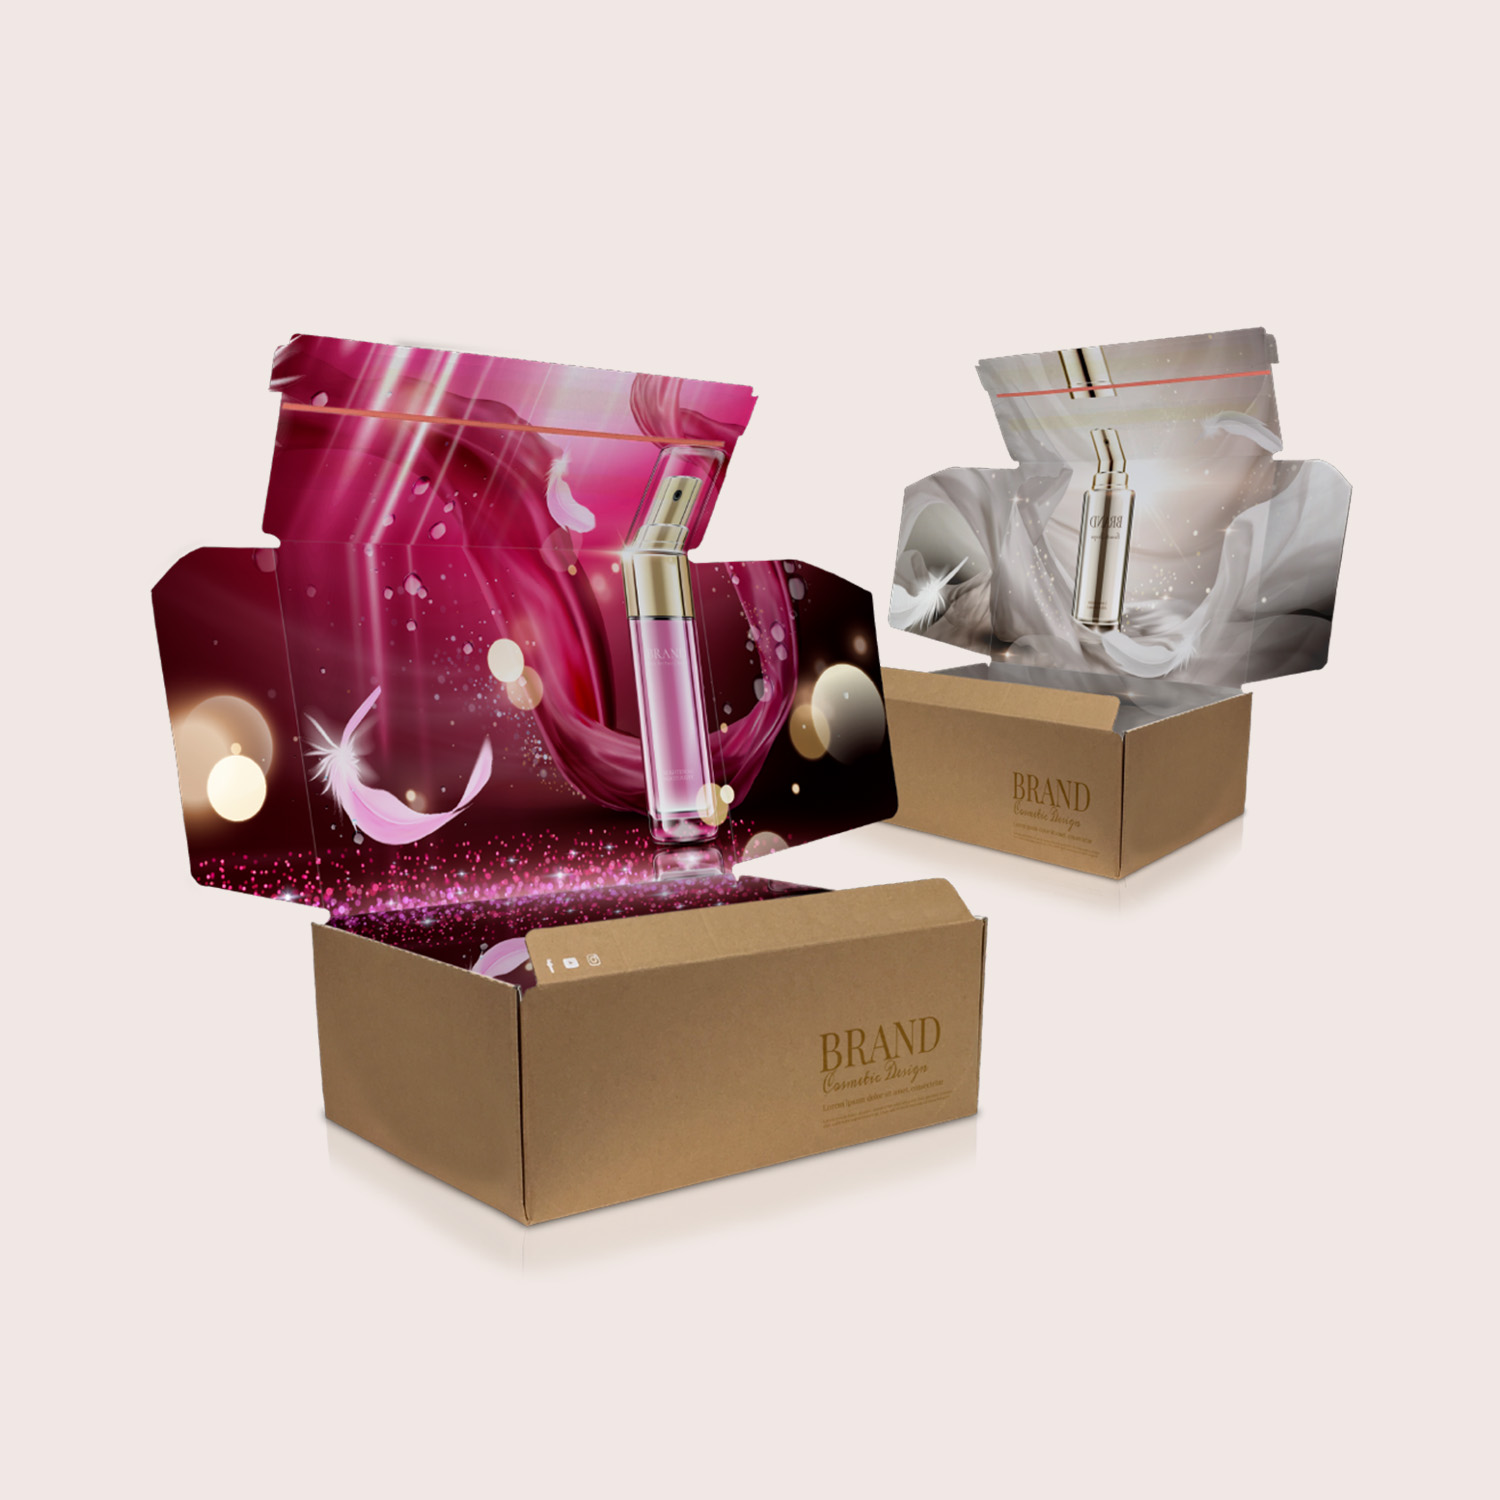 Two digitally-printed packaging units